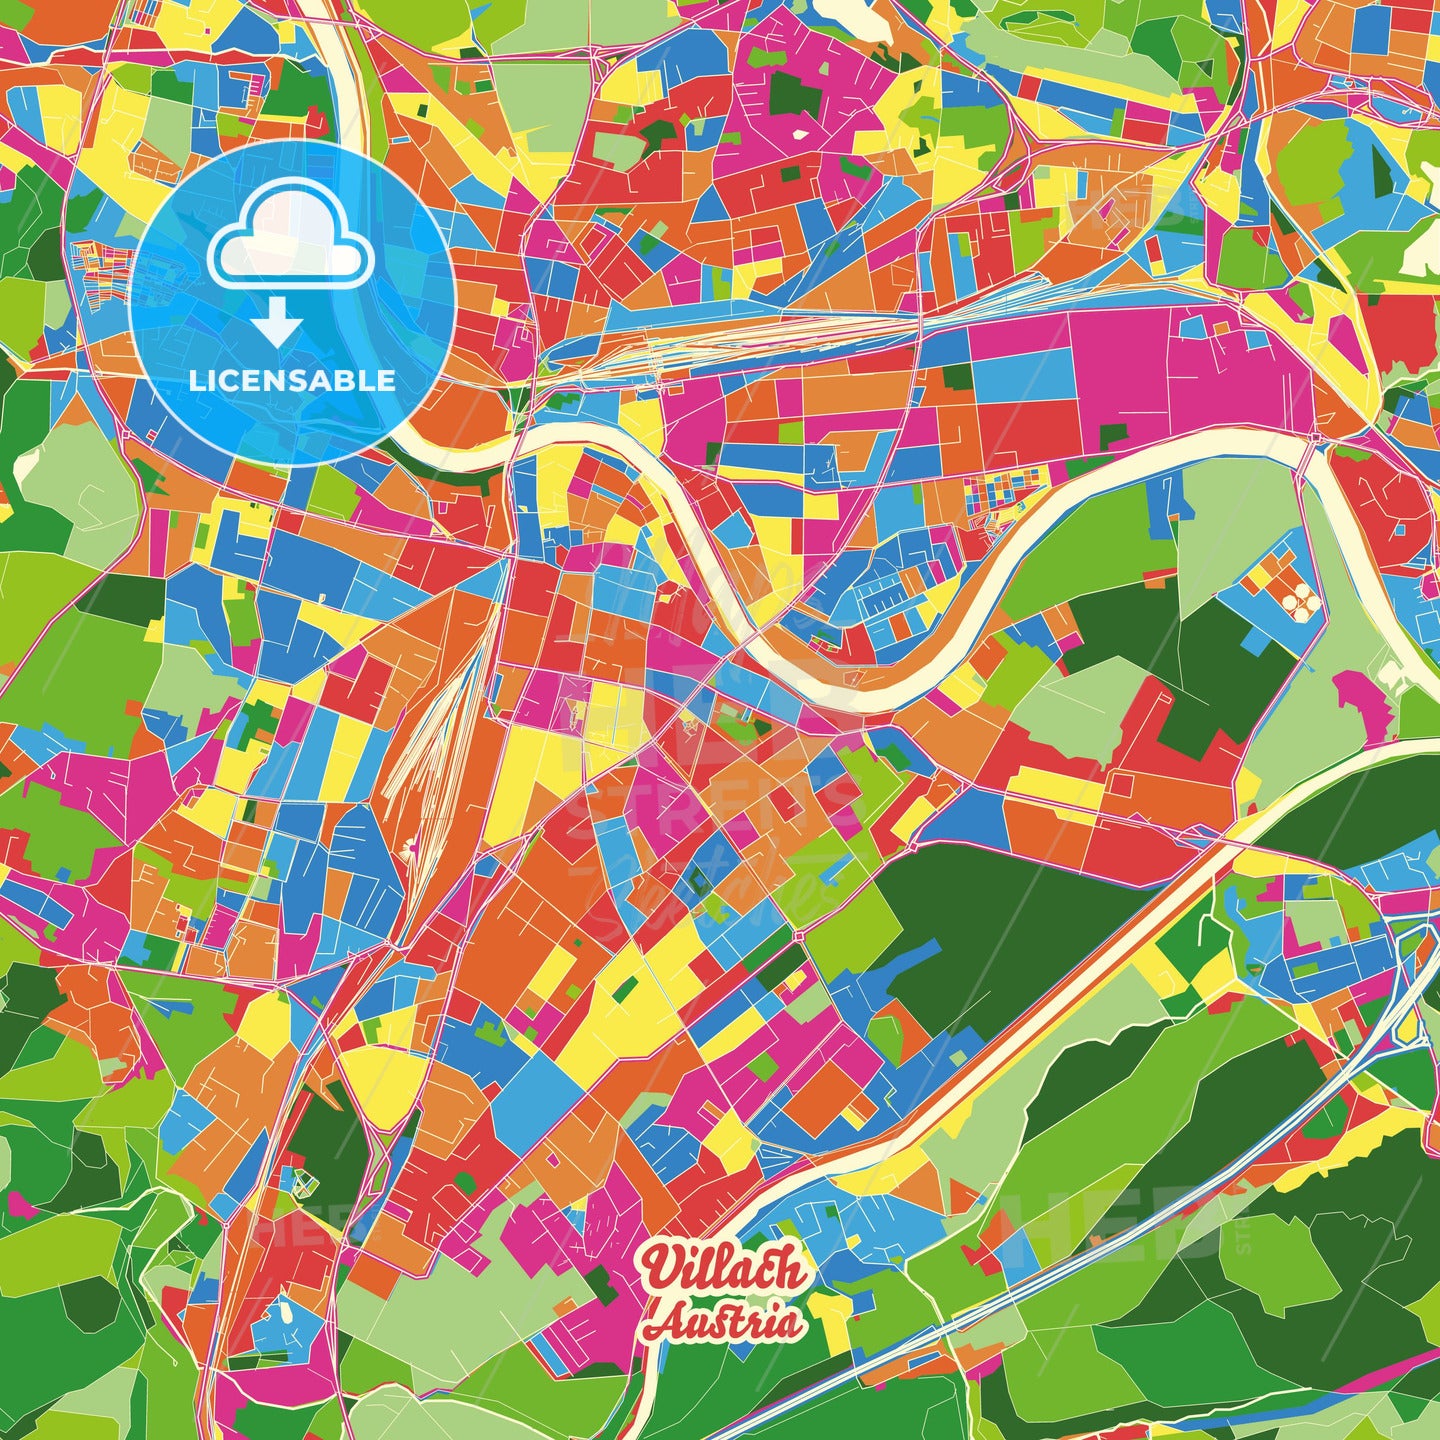 Villach, Austria Crazy Colorful Street Map Poster Template - HEBSTREITS Sketches